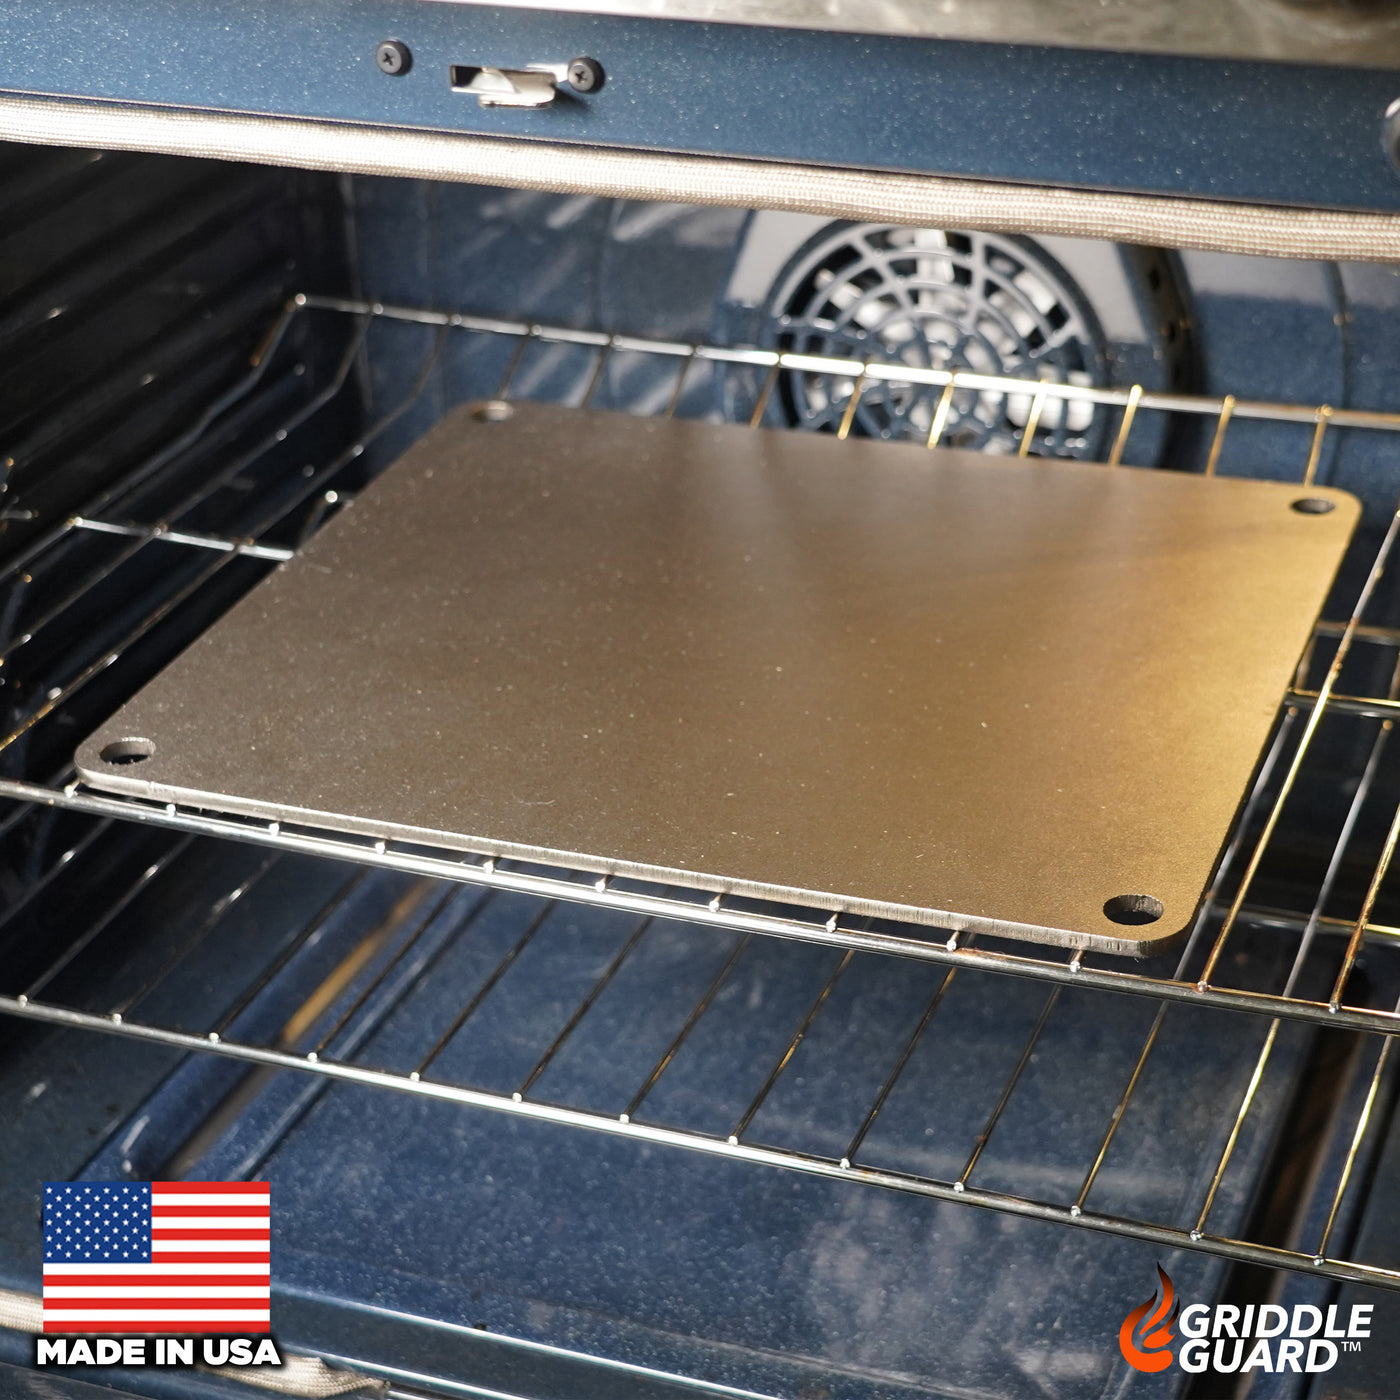 Griddle Guard Pizza Steel